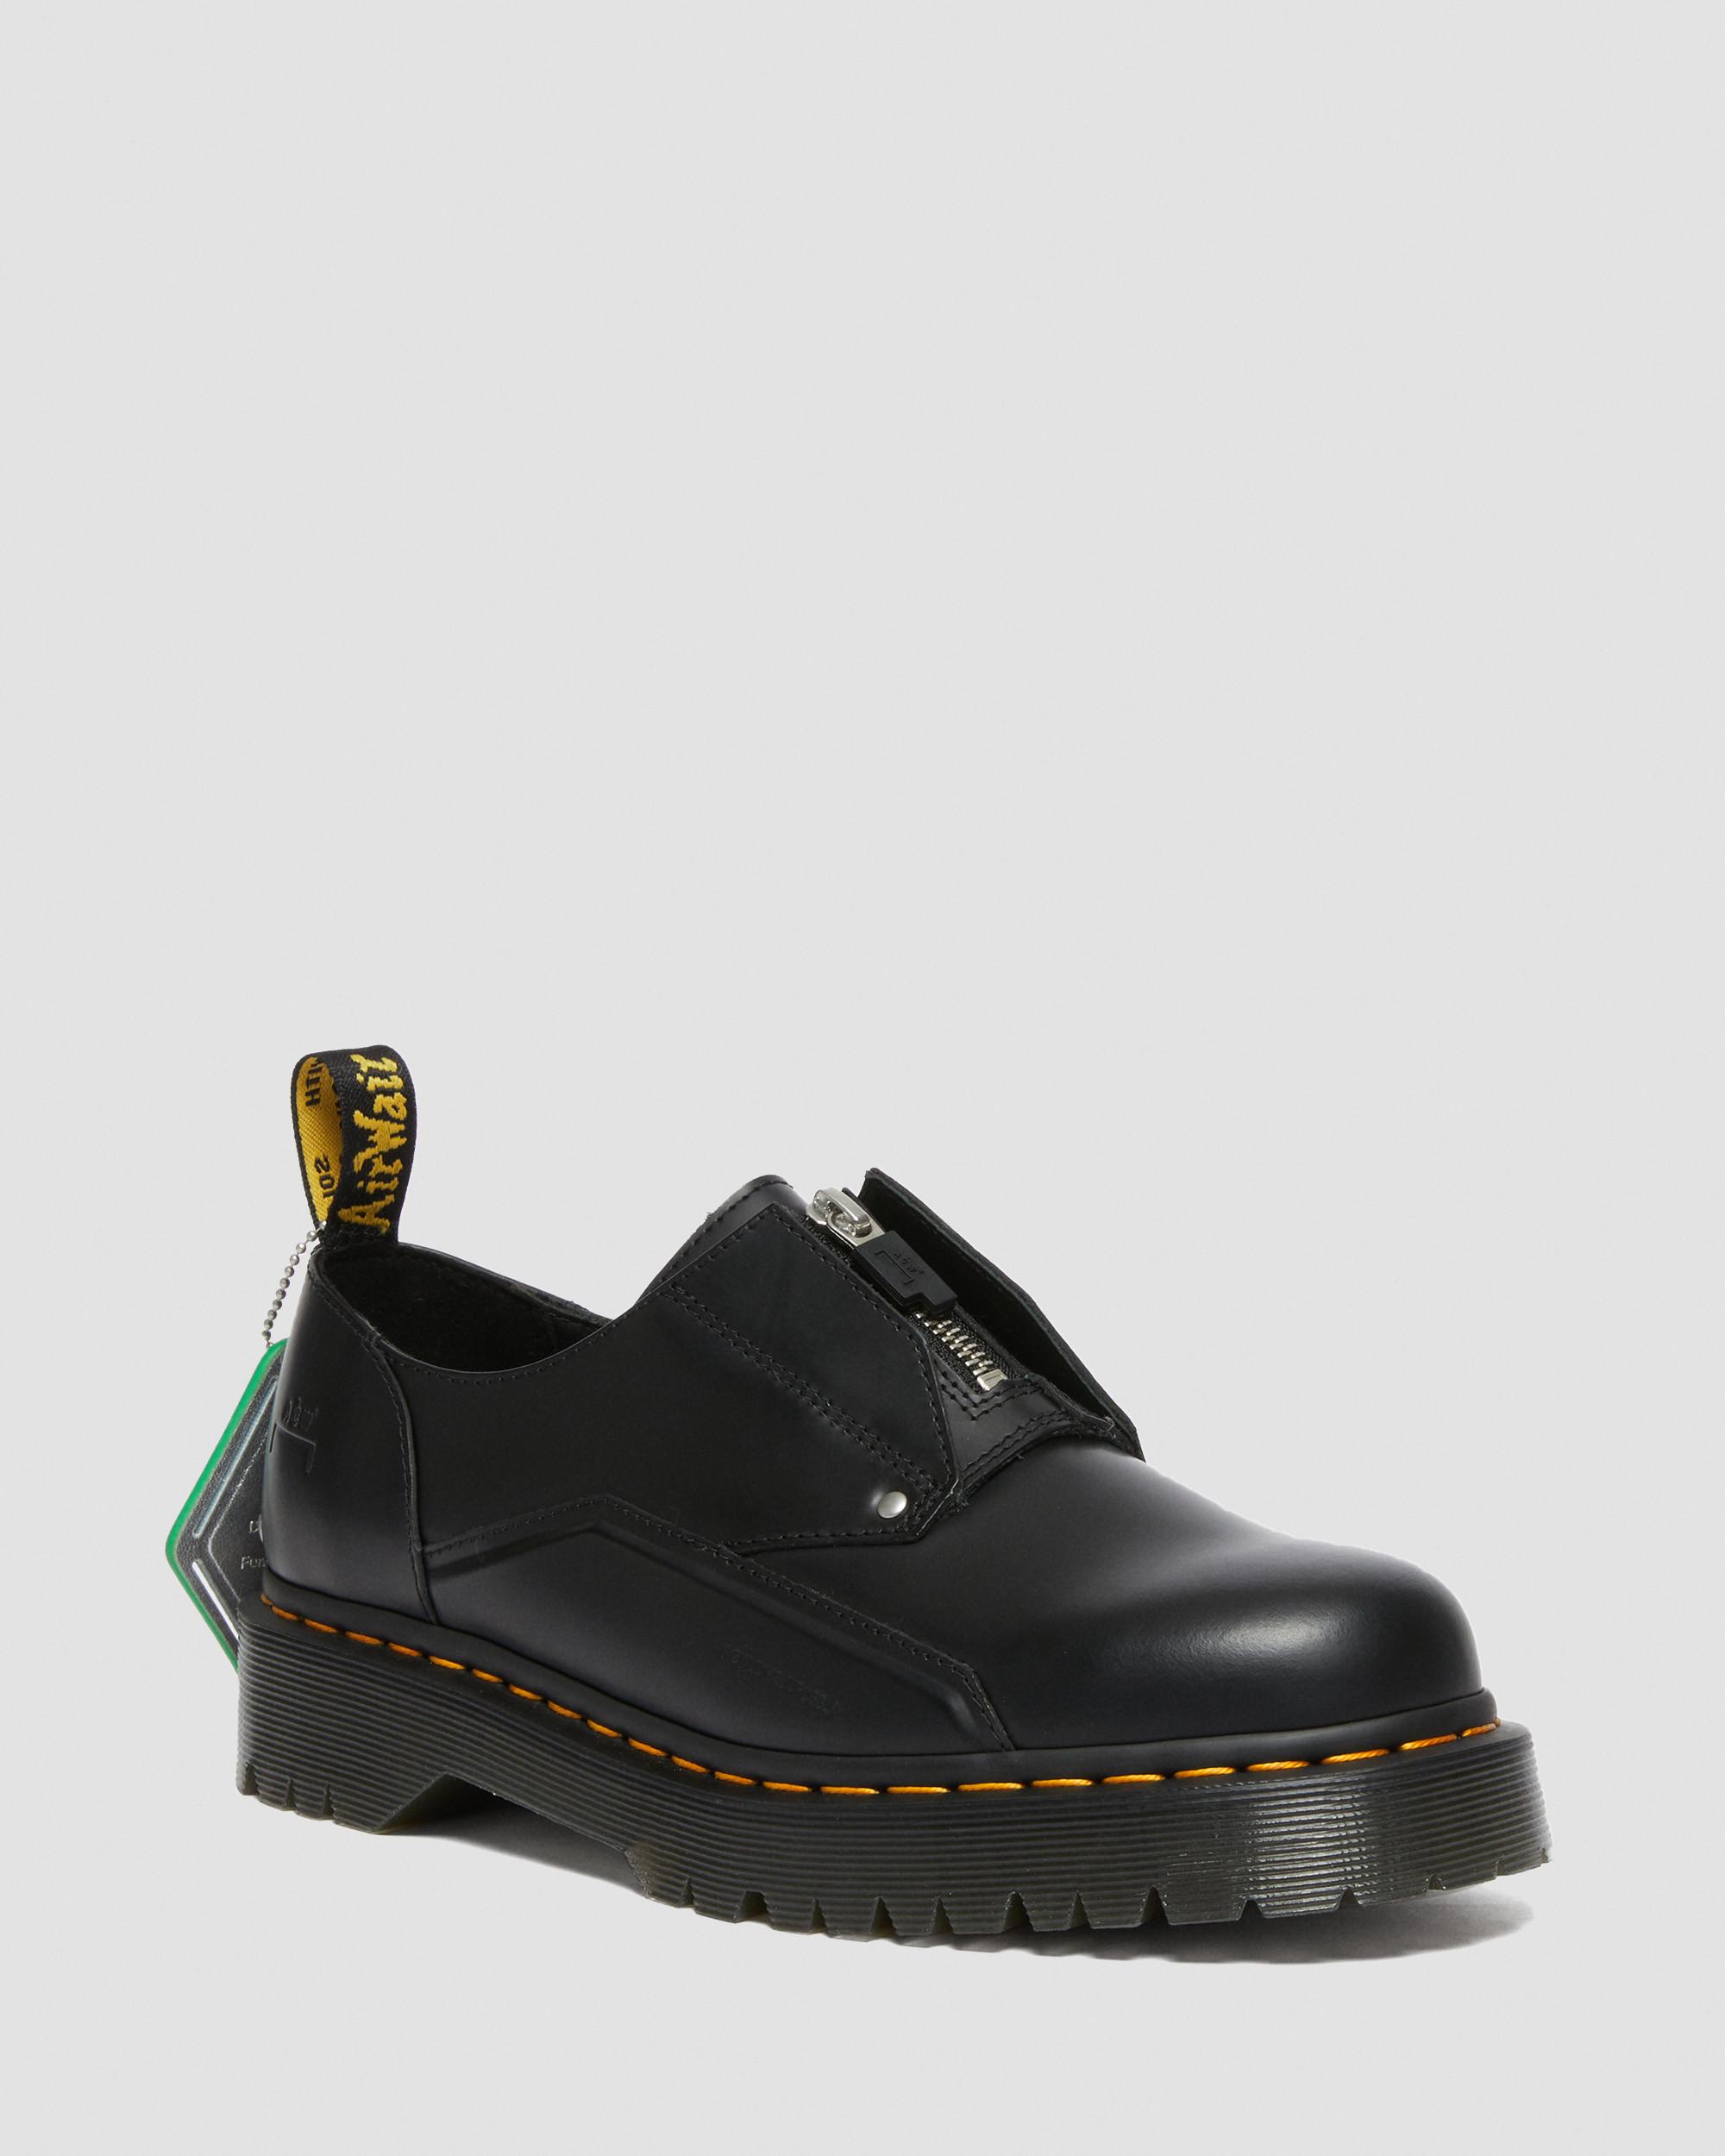 1461 Bex ACW* Leather Shoes in Black | Dr. Martens